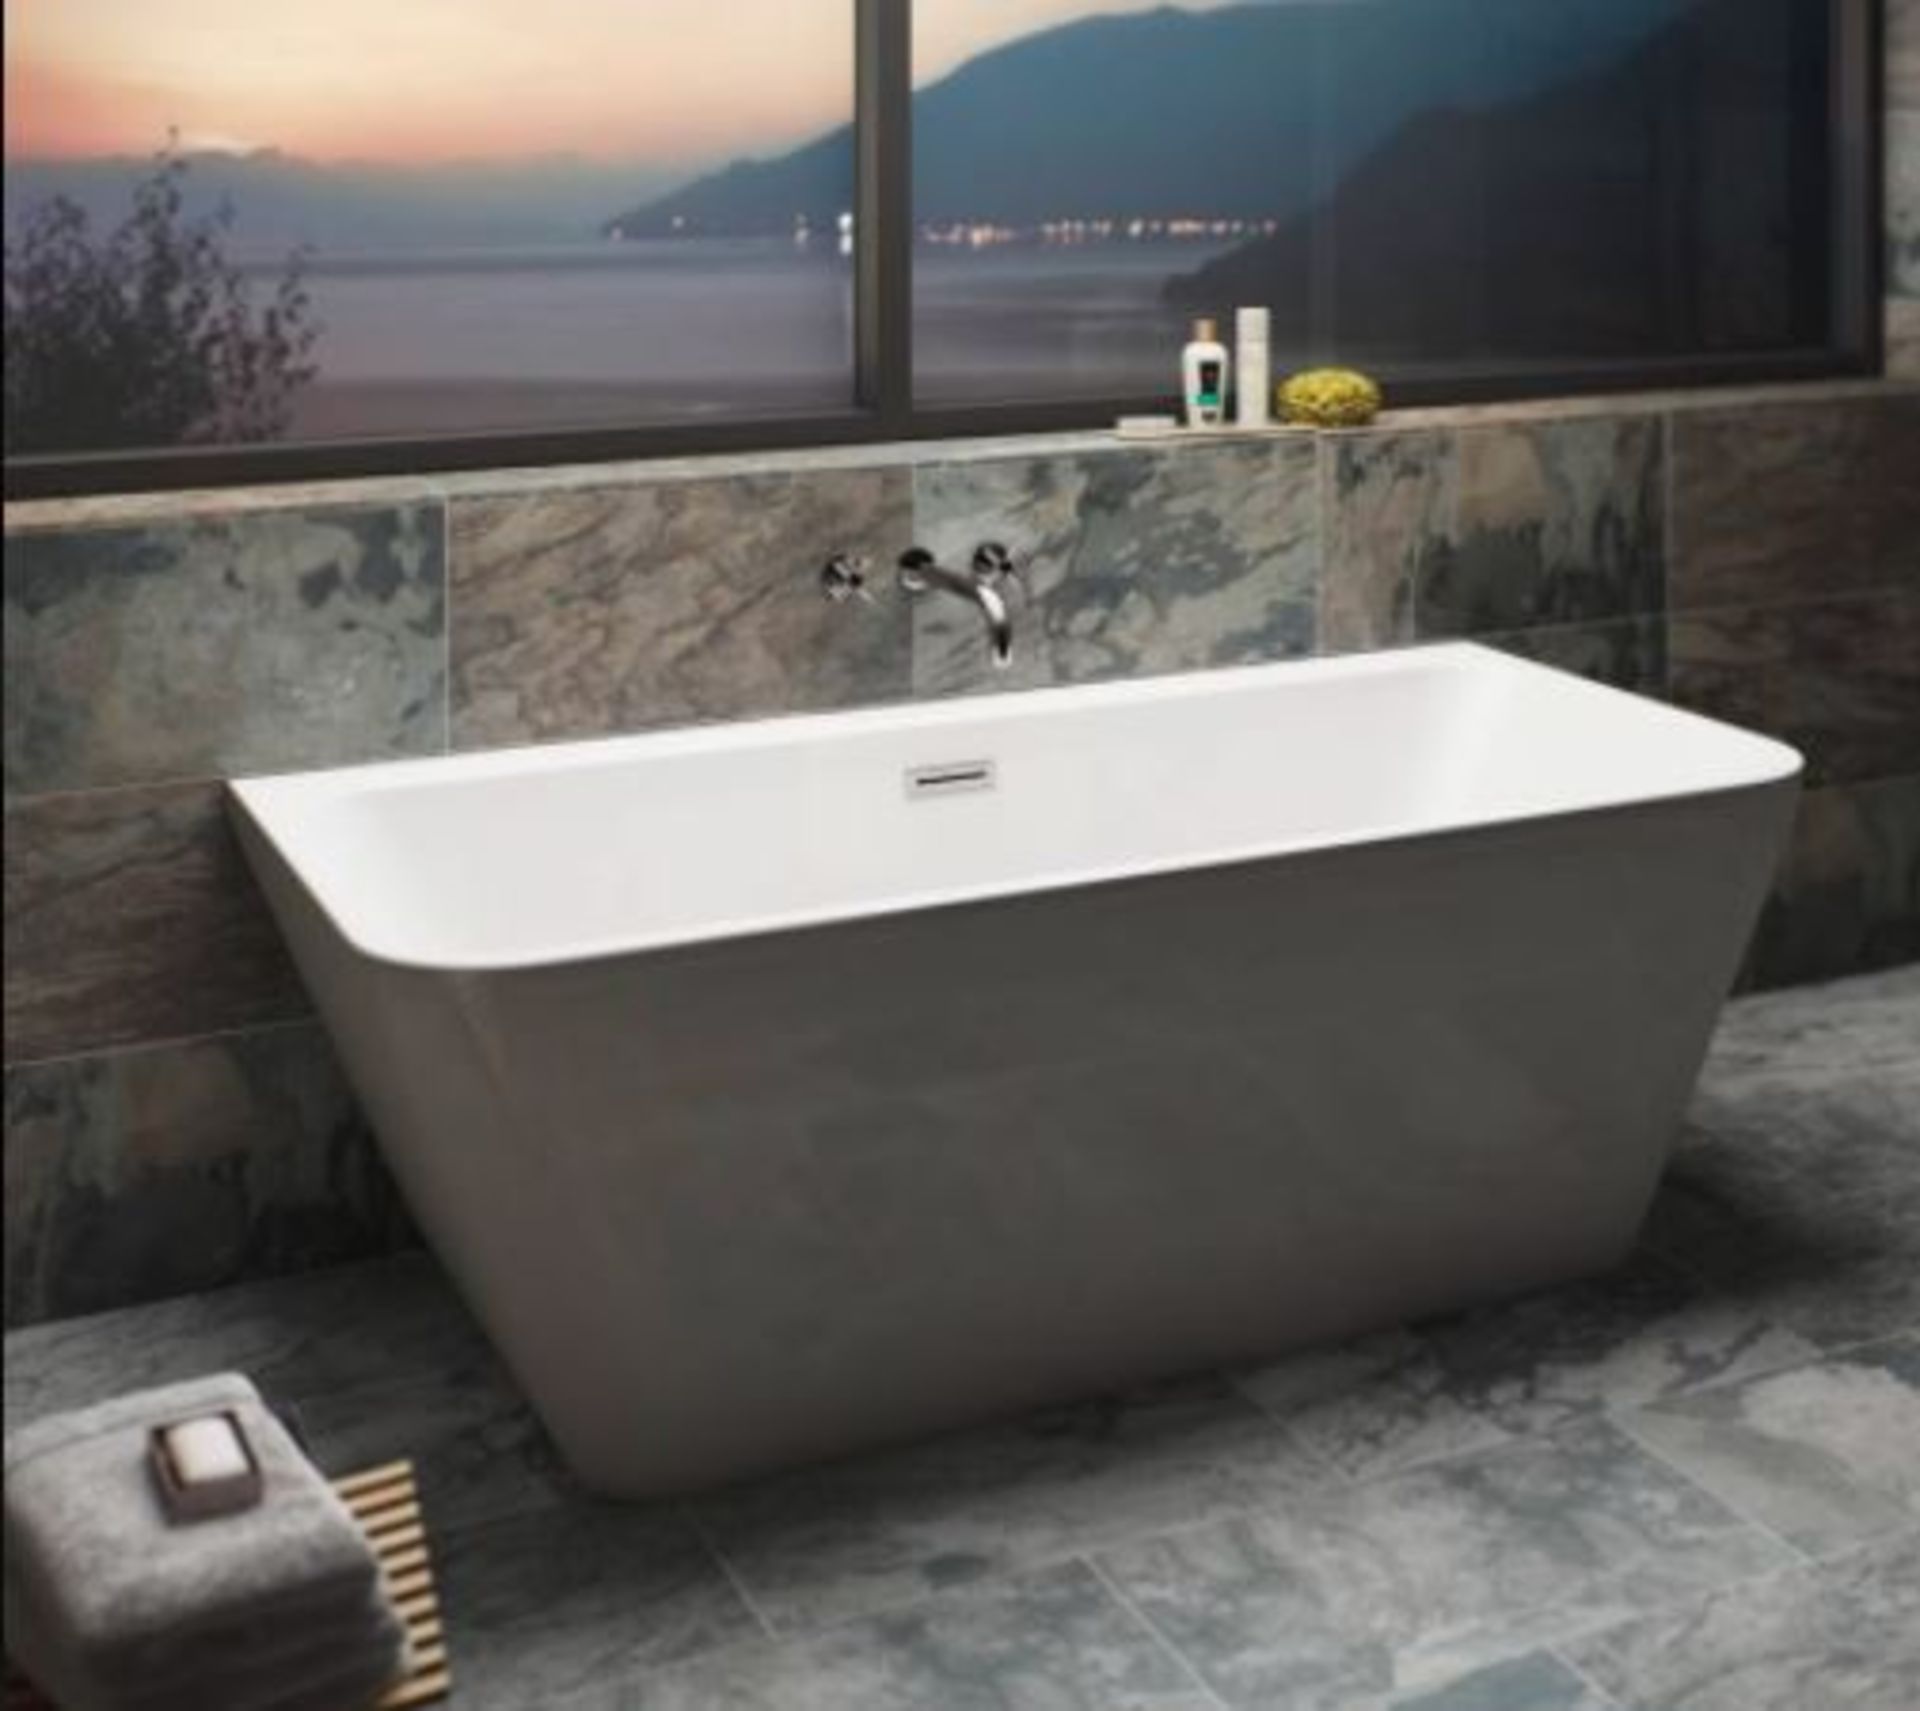 RRP £799. Mode Carter back to wall Freestanding bath 1700 x 750mm. Bath depth 460mm, capacity 250 l - Image 5 of 6